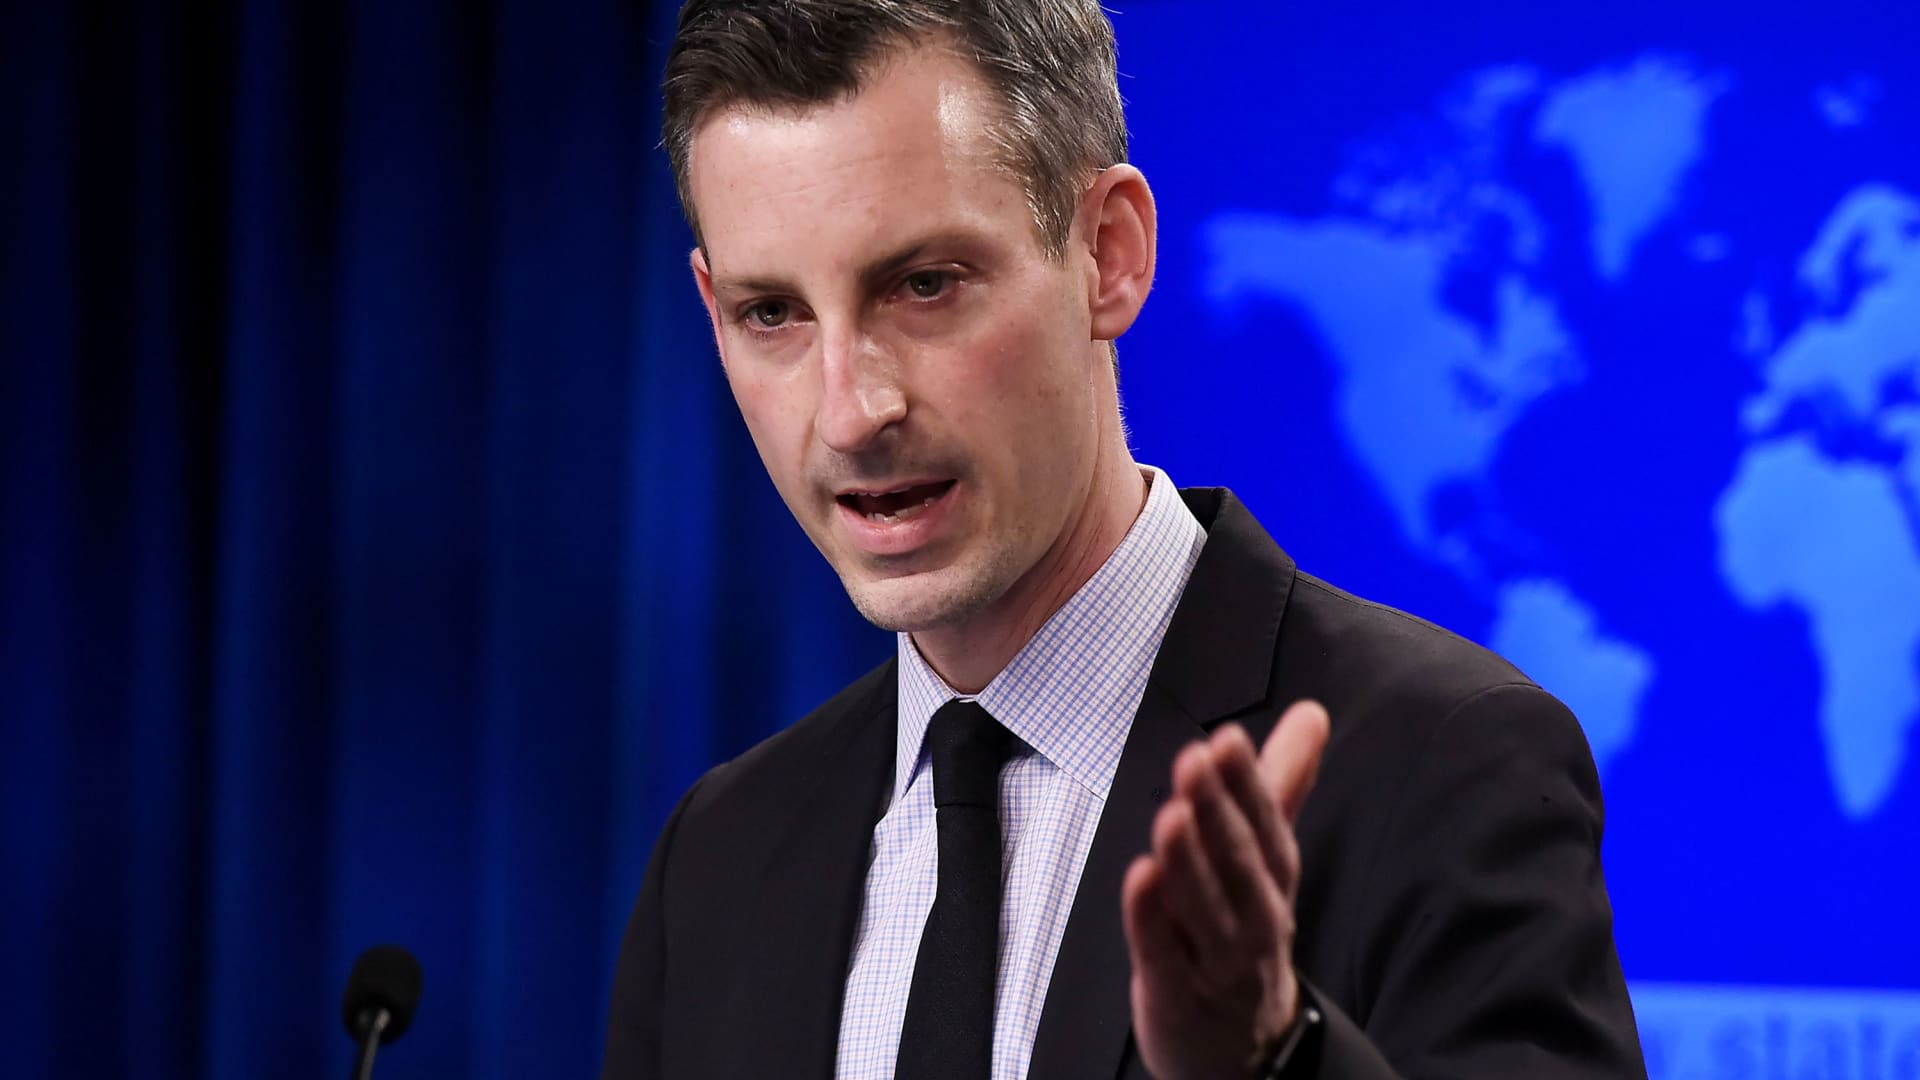 U.S. State Department spokesman Ned Price answers a question during a news briefing at the department in Washington, February 9, 2021.